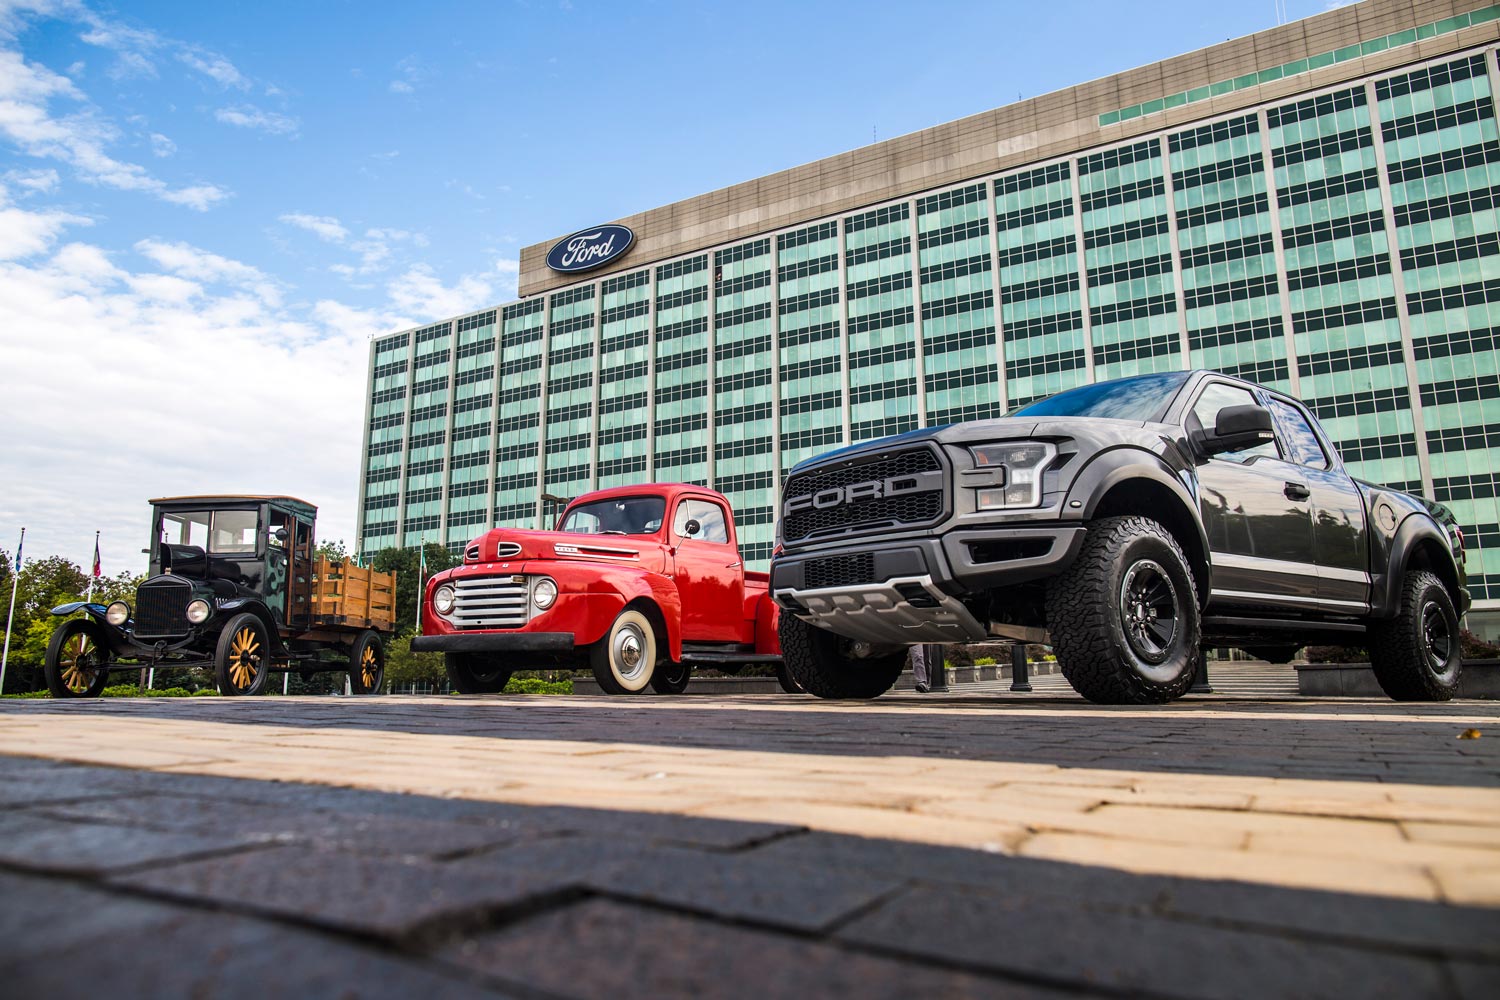 Three Ford pickup trucks lined up with 1917 Ford Model TT on the left.